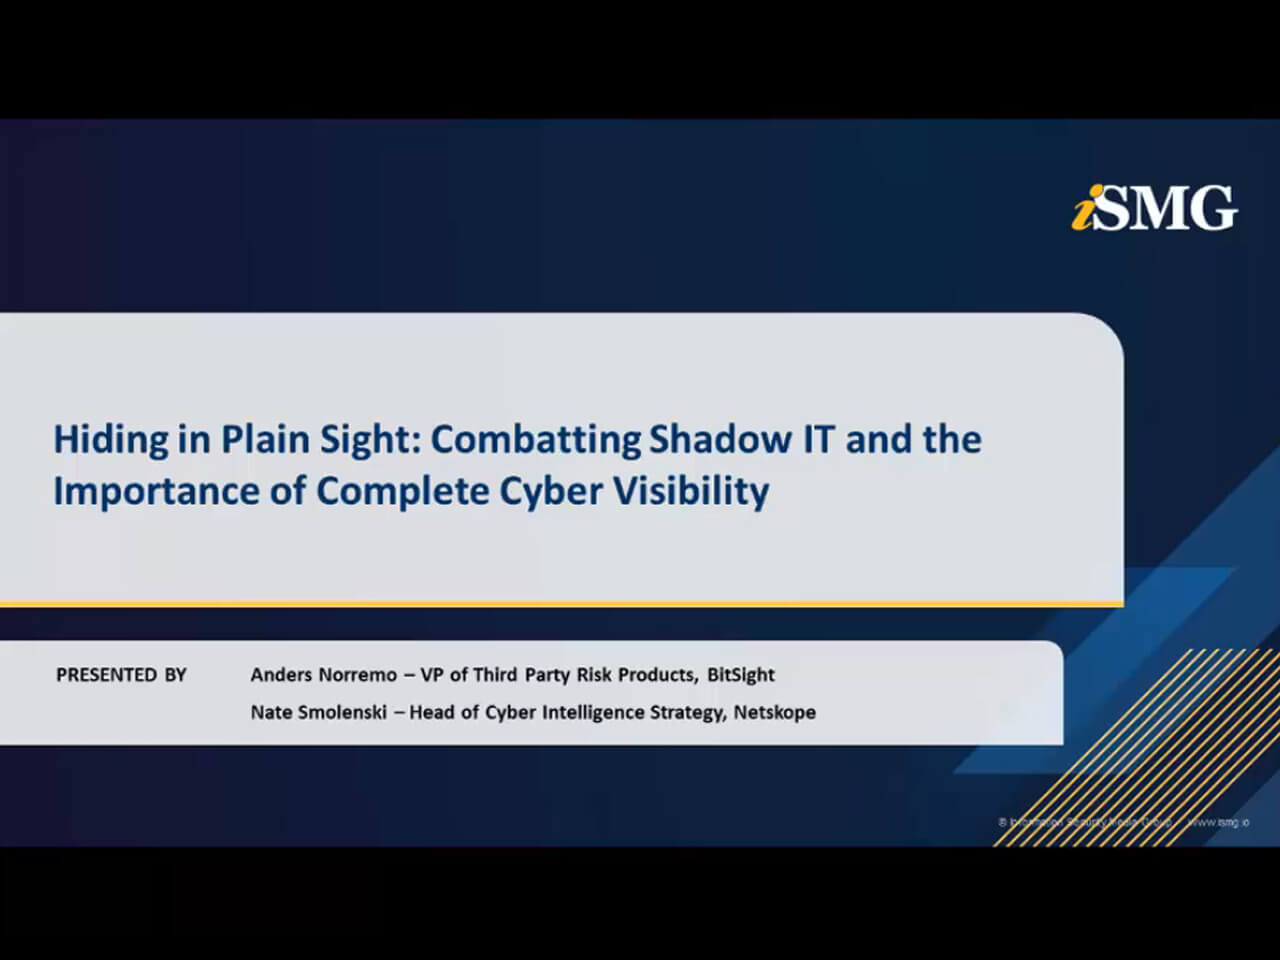 Hiding in Plain Sight-Combatting Shadow IT and the Importance of Complete Cyber Visibility